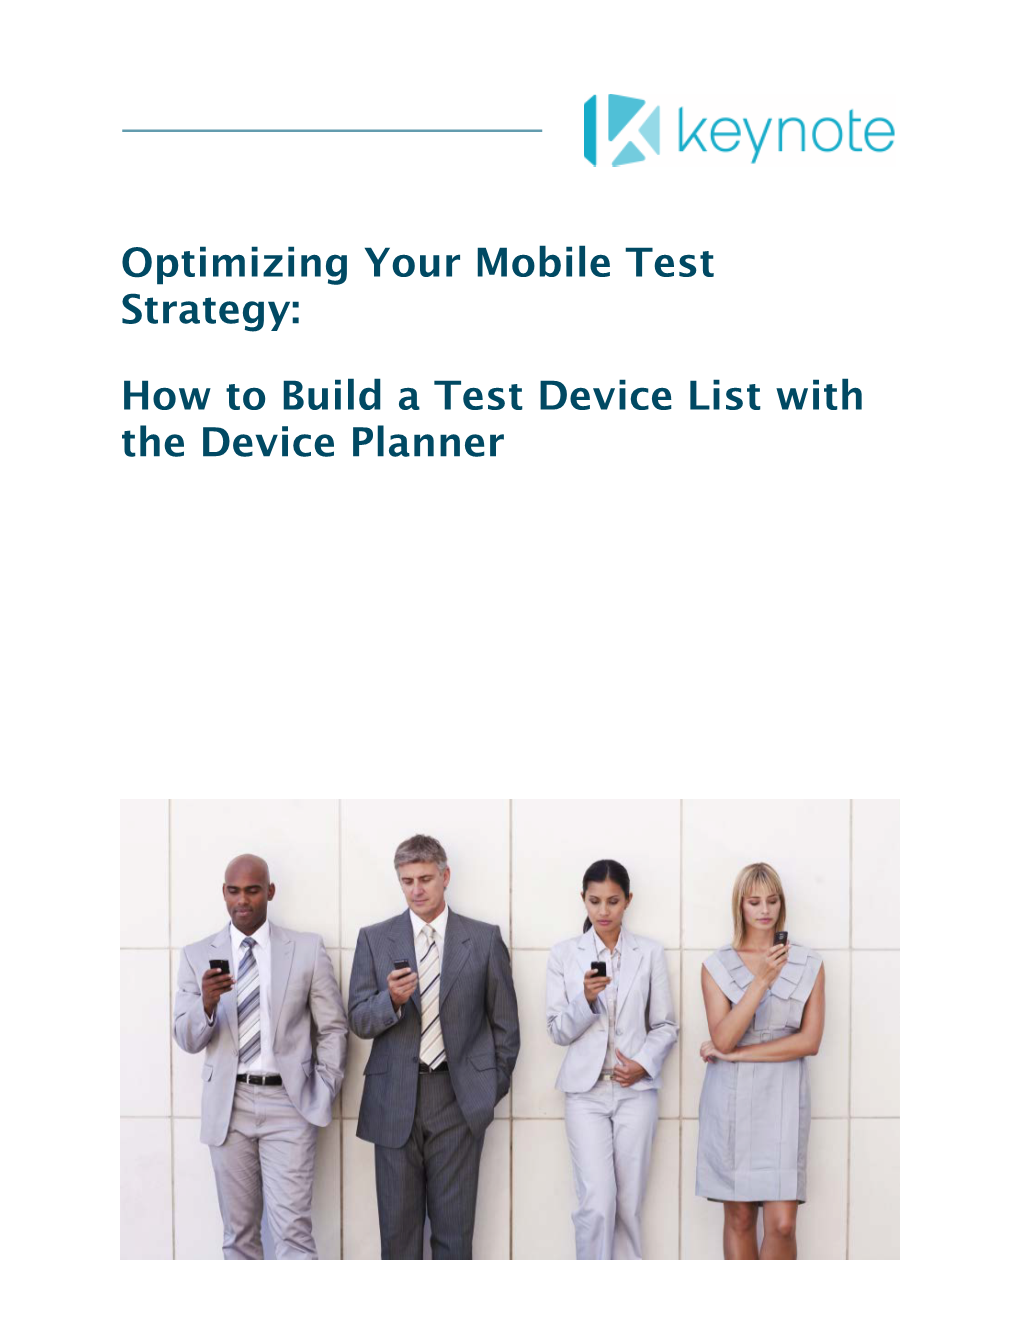 How to Build a Test Device List with the Device Planner